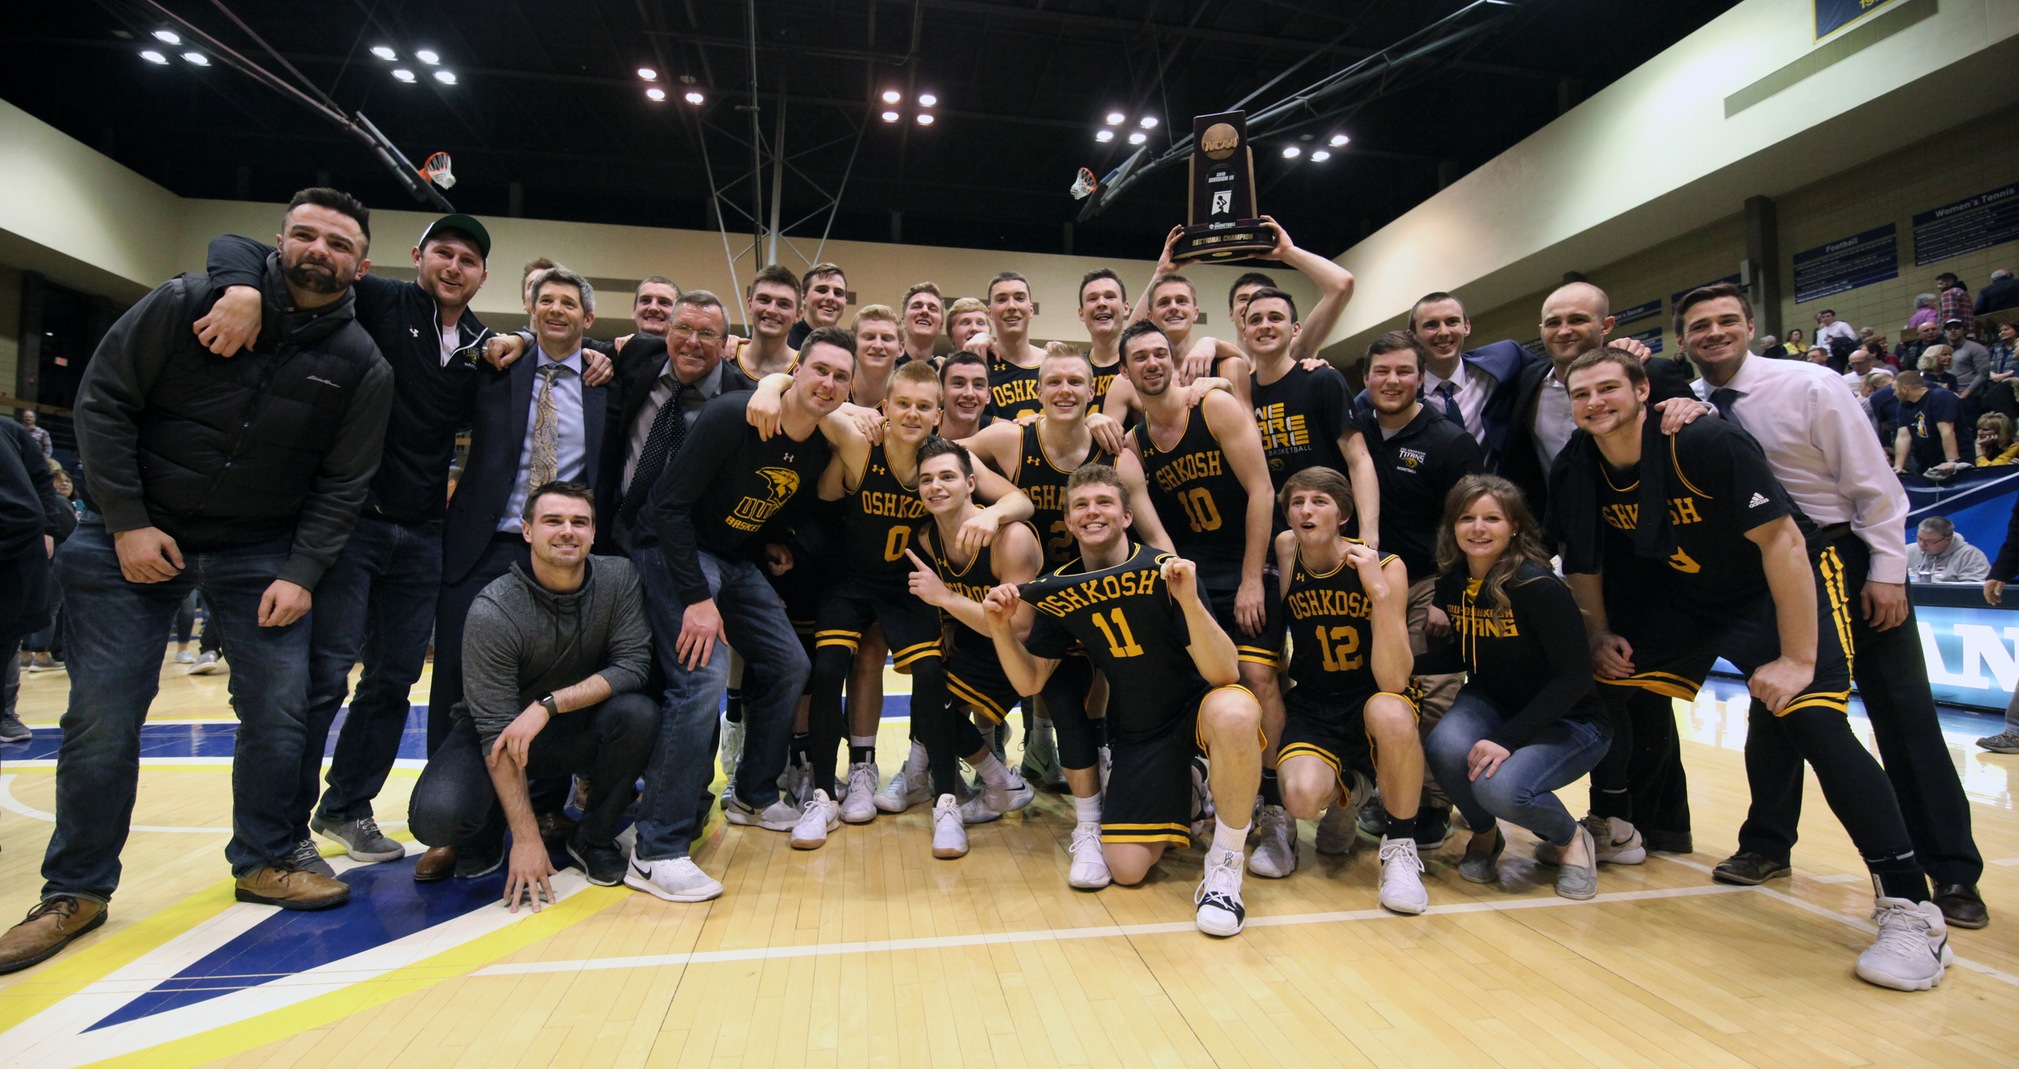 UW-Oshkosh defeated Augustana College, 95-88 in overtime, to advance to its first NCAA Division III Final Four.